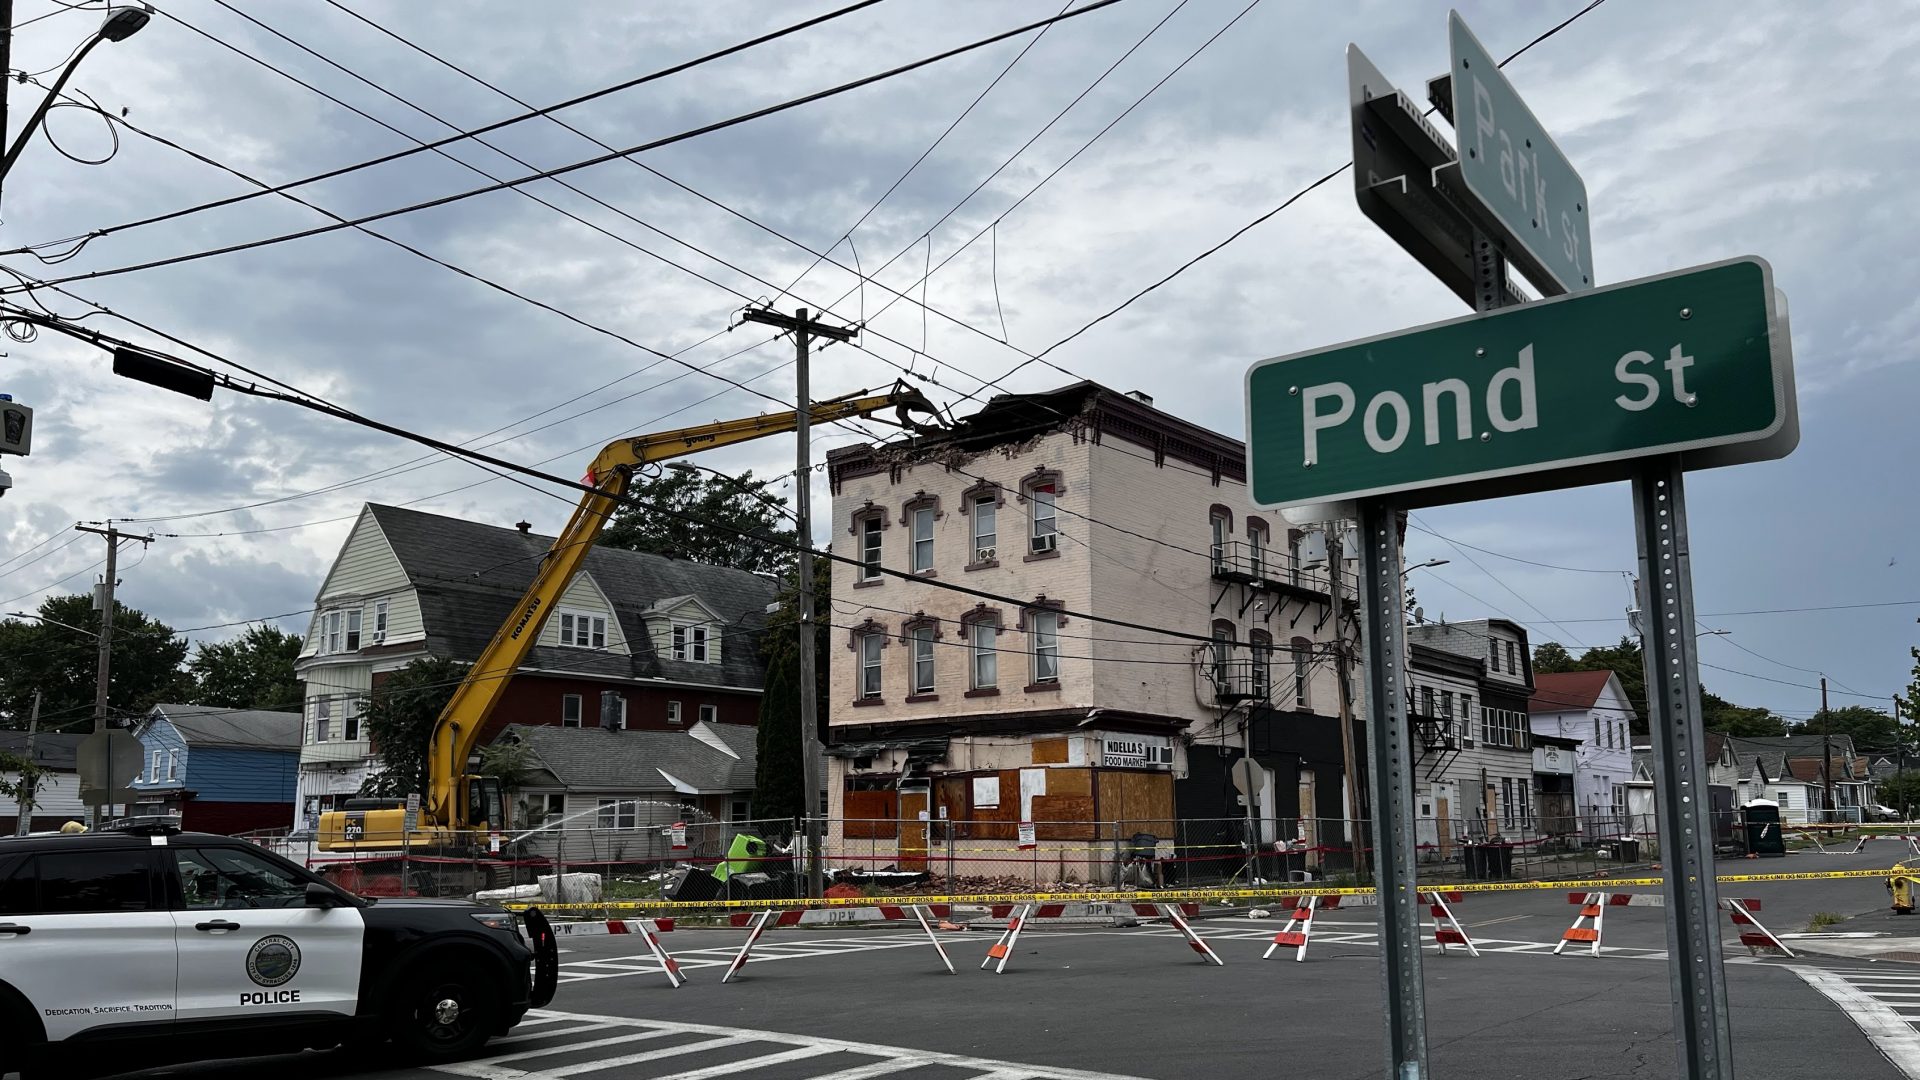 Workers begin tearing down a collapsing building on Pond Street